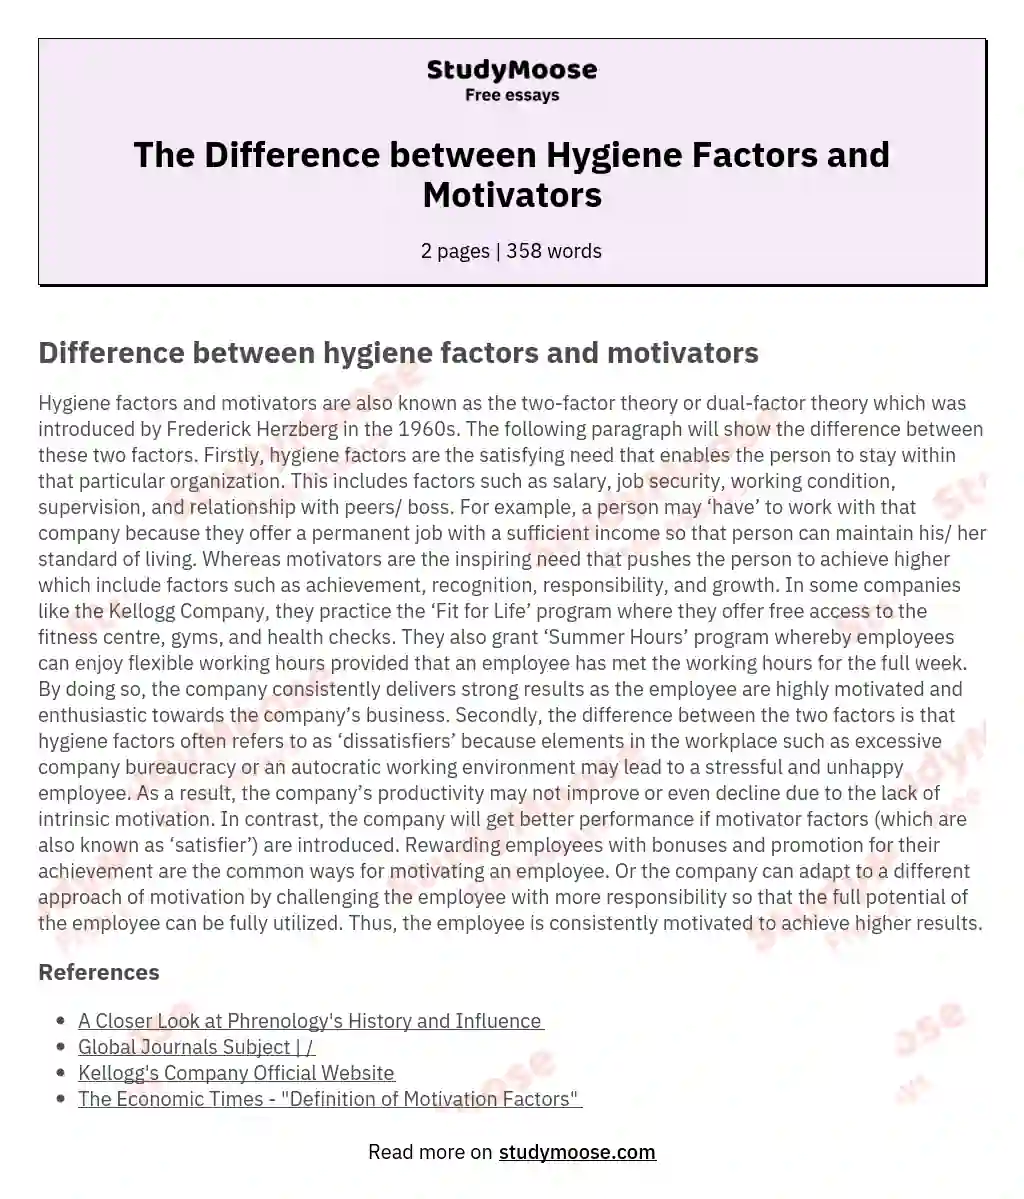 The Difference between Hygiene Factors and Motivators essay